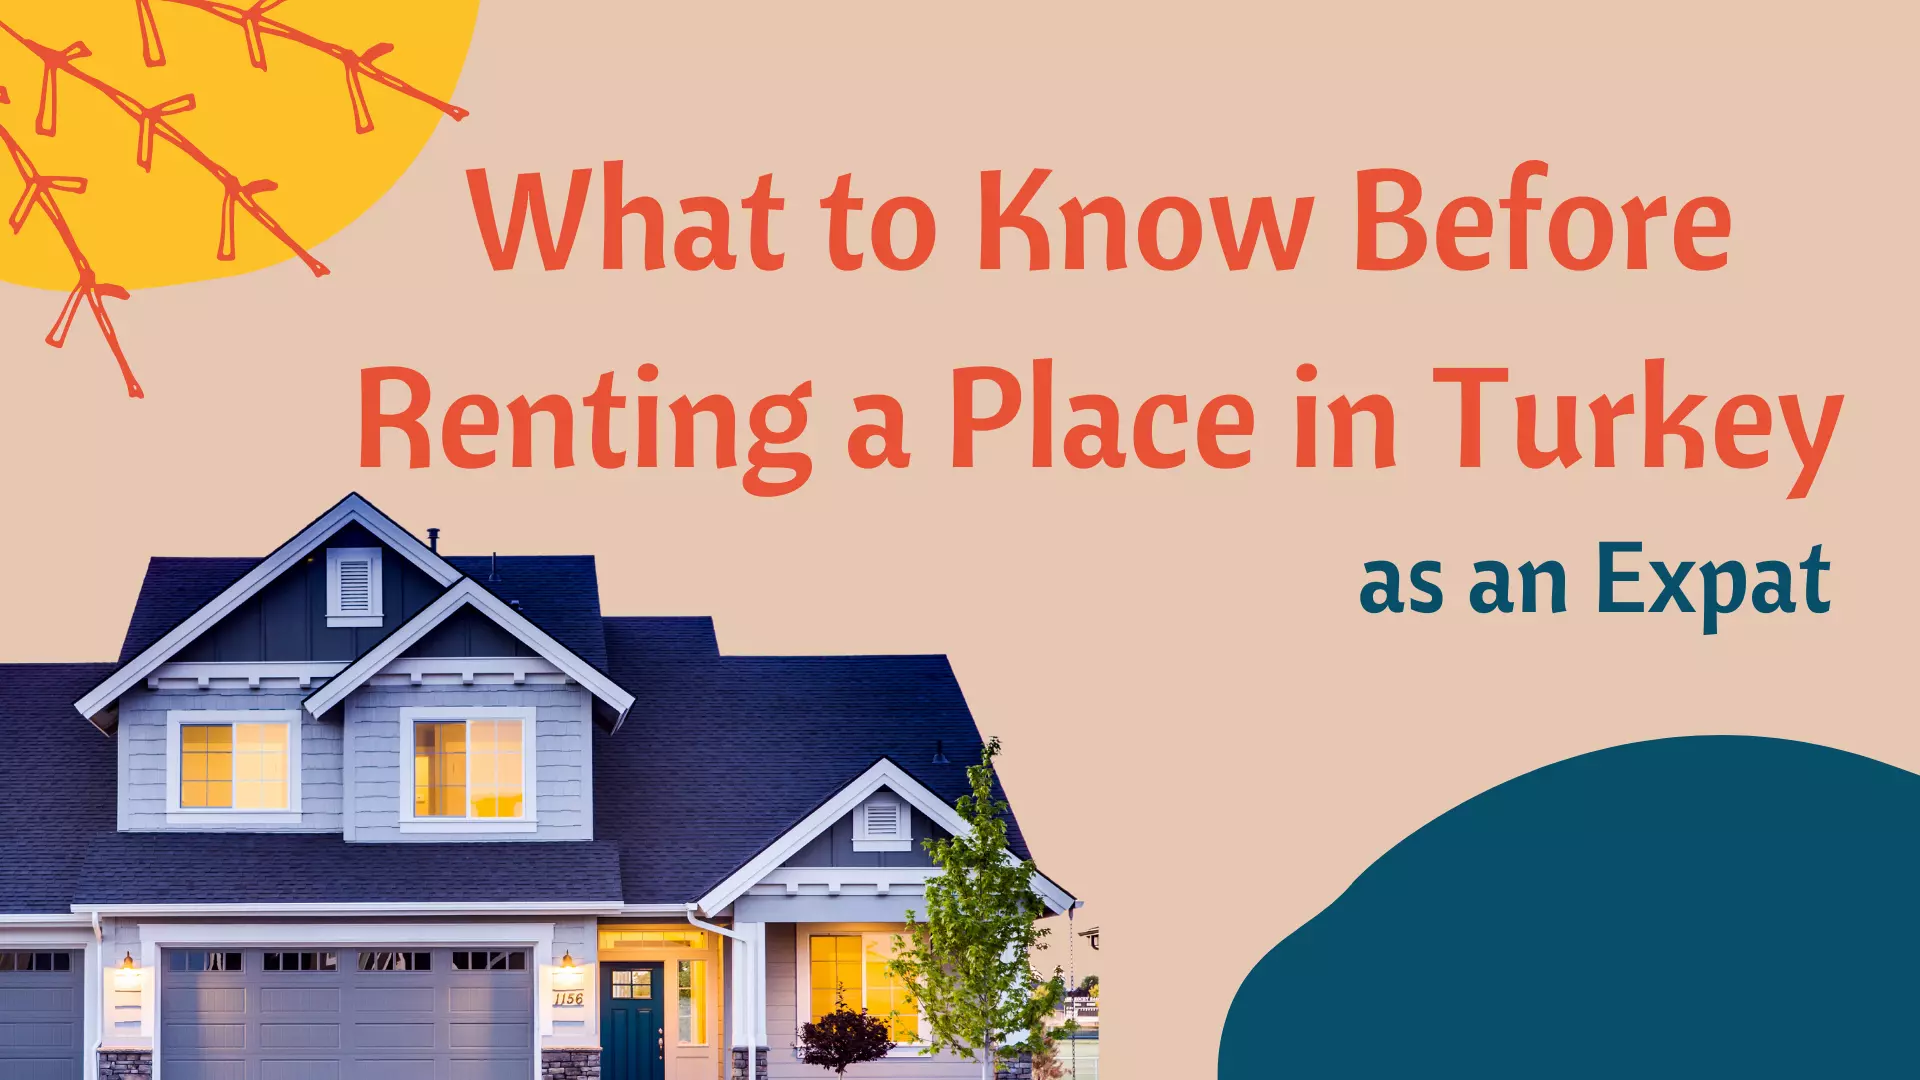 What to Know Before Renting a Place in Turkey as an Expat